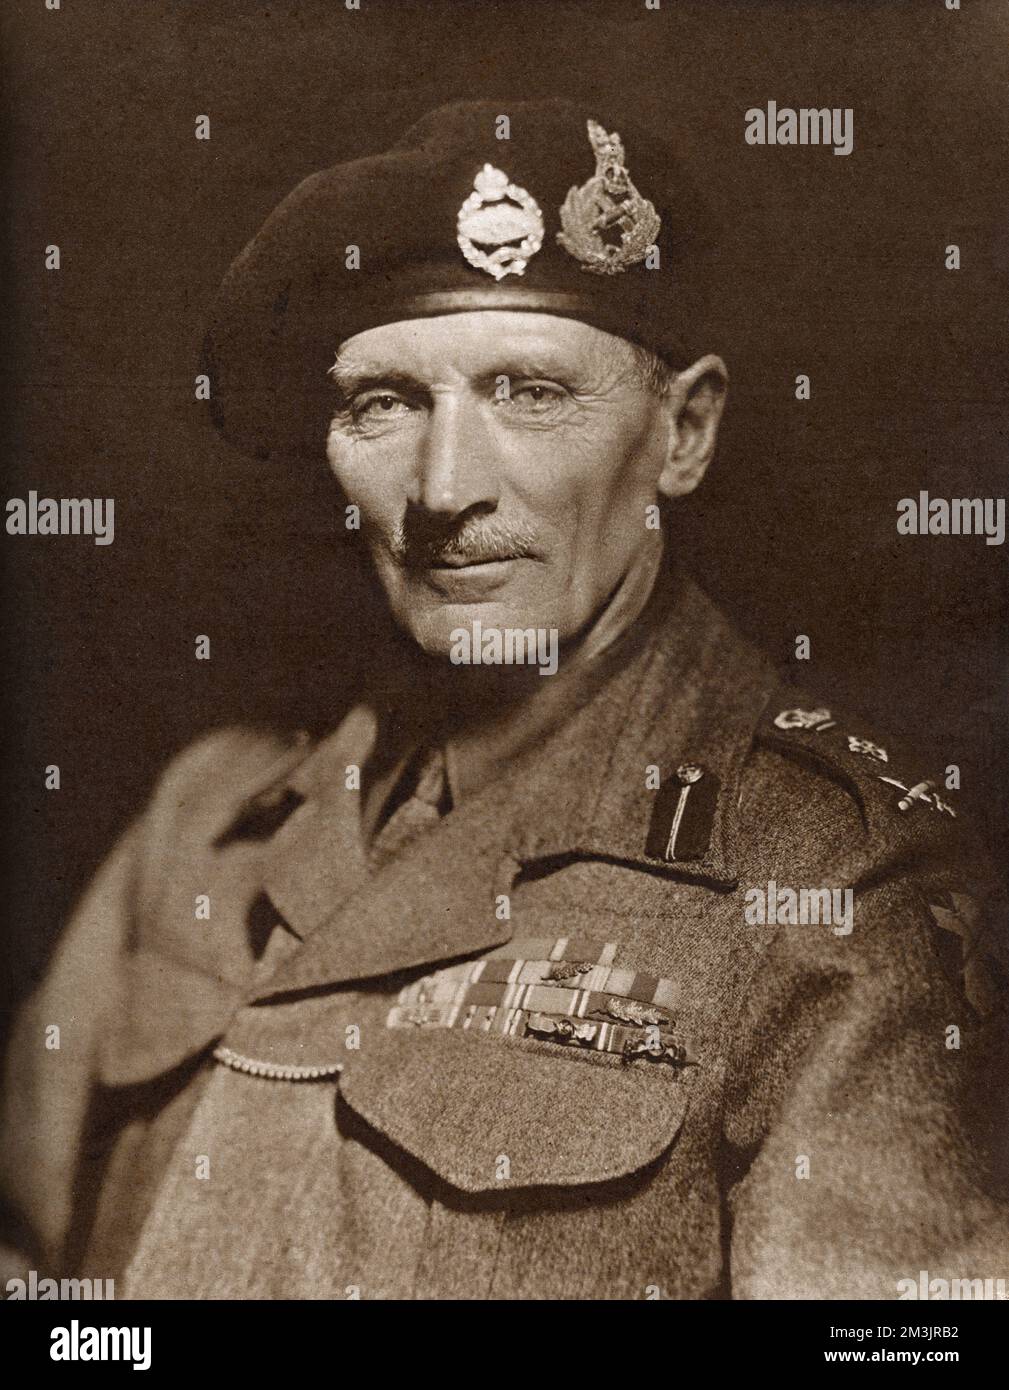 General Bernard Law Montgomery, 1st Viscount of Alamein (1887-1976). Montgomery was in command the 3rd division assault on Northern France in 1944. The military manoeuvre began in the early hours of June 6th and included British, Canadian and U.S forces. General Montgomery was famous for his command of the Eighth Army in the North African campaign and his defeat of Erwin Rommel at the Battle of El Alamein. He had previously served in World War One, during which he won the D.S.O.  June 1944 Stock Photo